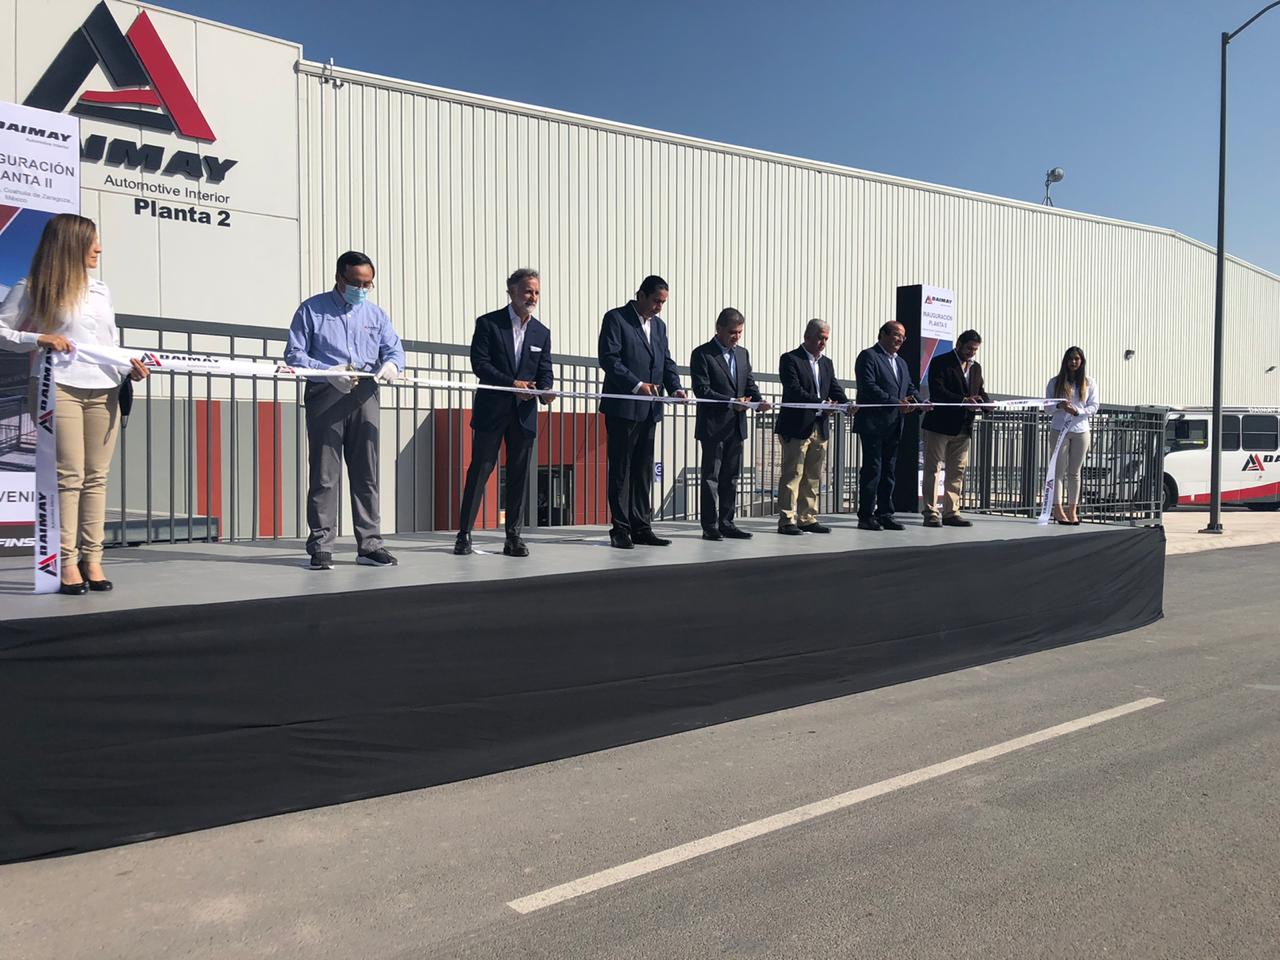 Daimay opens its second plant in Coahuila; They announce a new investment of 30 million dollars